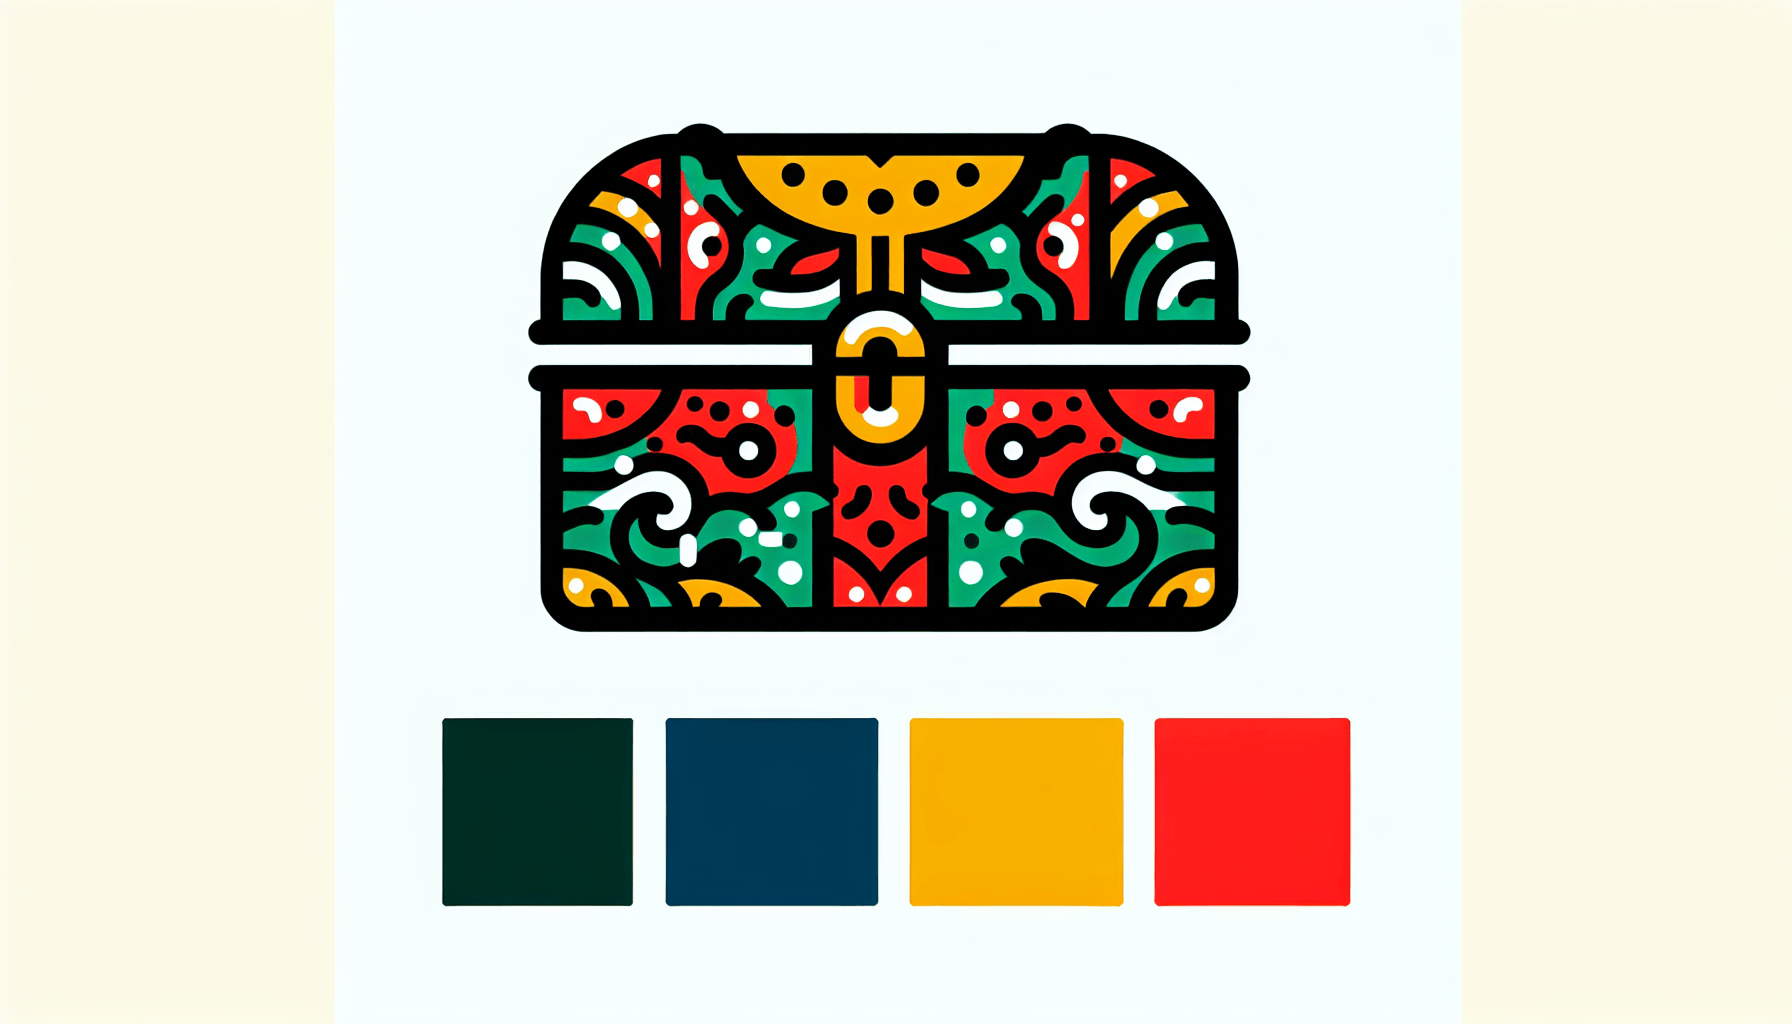 Treasure chest in flat illustration style and white background, red #f47574, green #88c7a8, yellow #fcc44b, and blue #645bc8 colors.